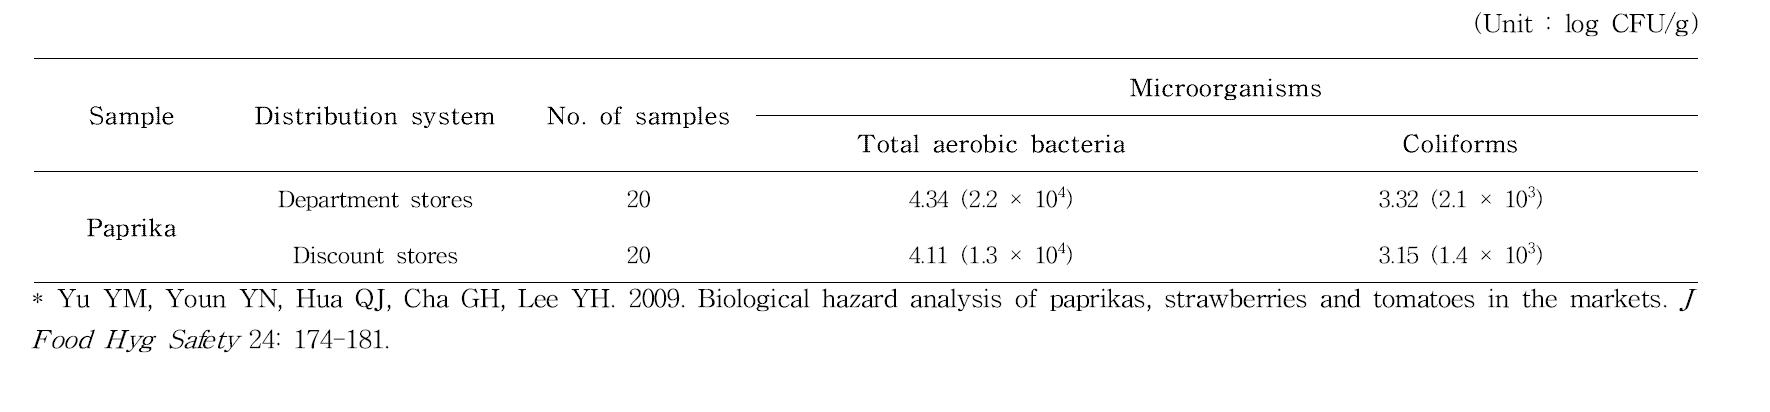 Counts of total aerobic bacteria and coliforms in paprika according to distribution system in Daejeon